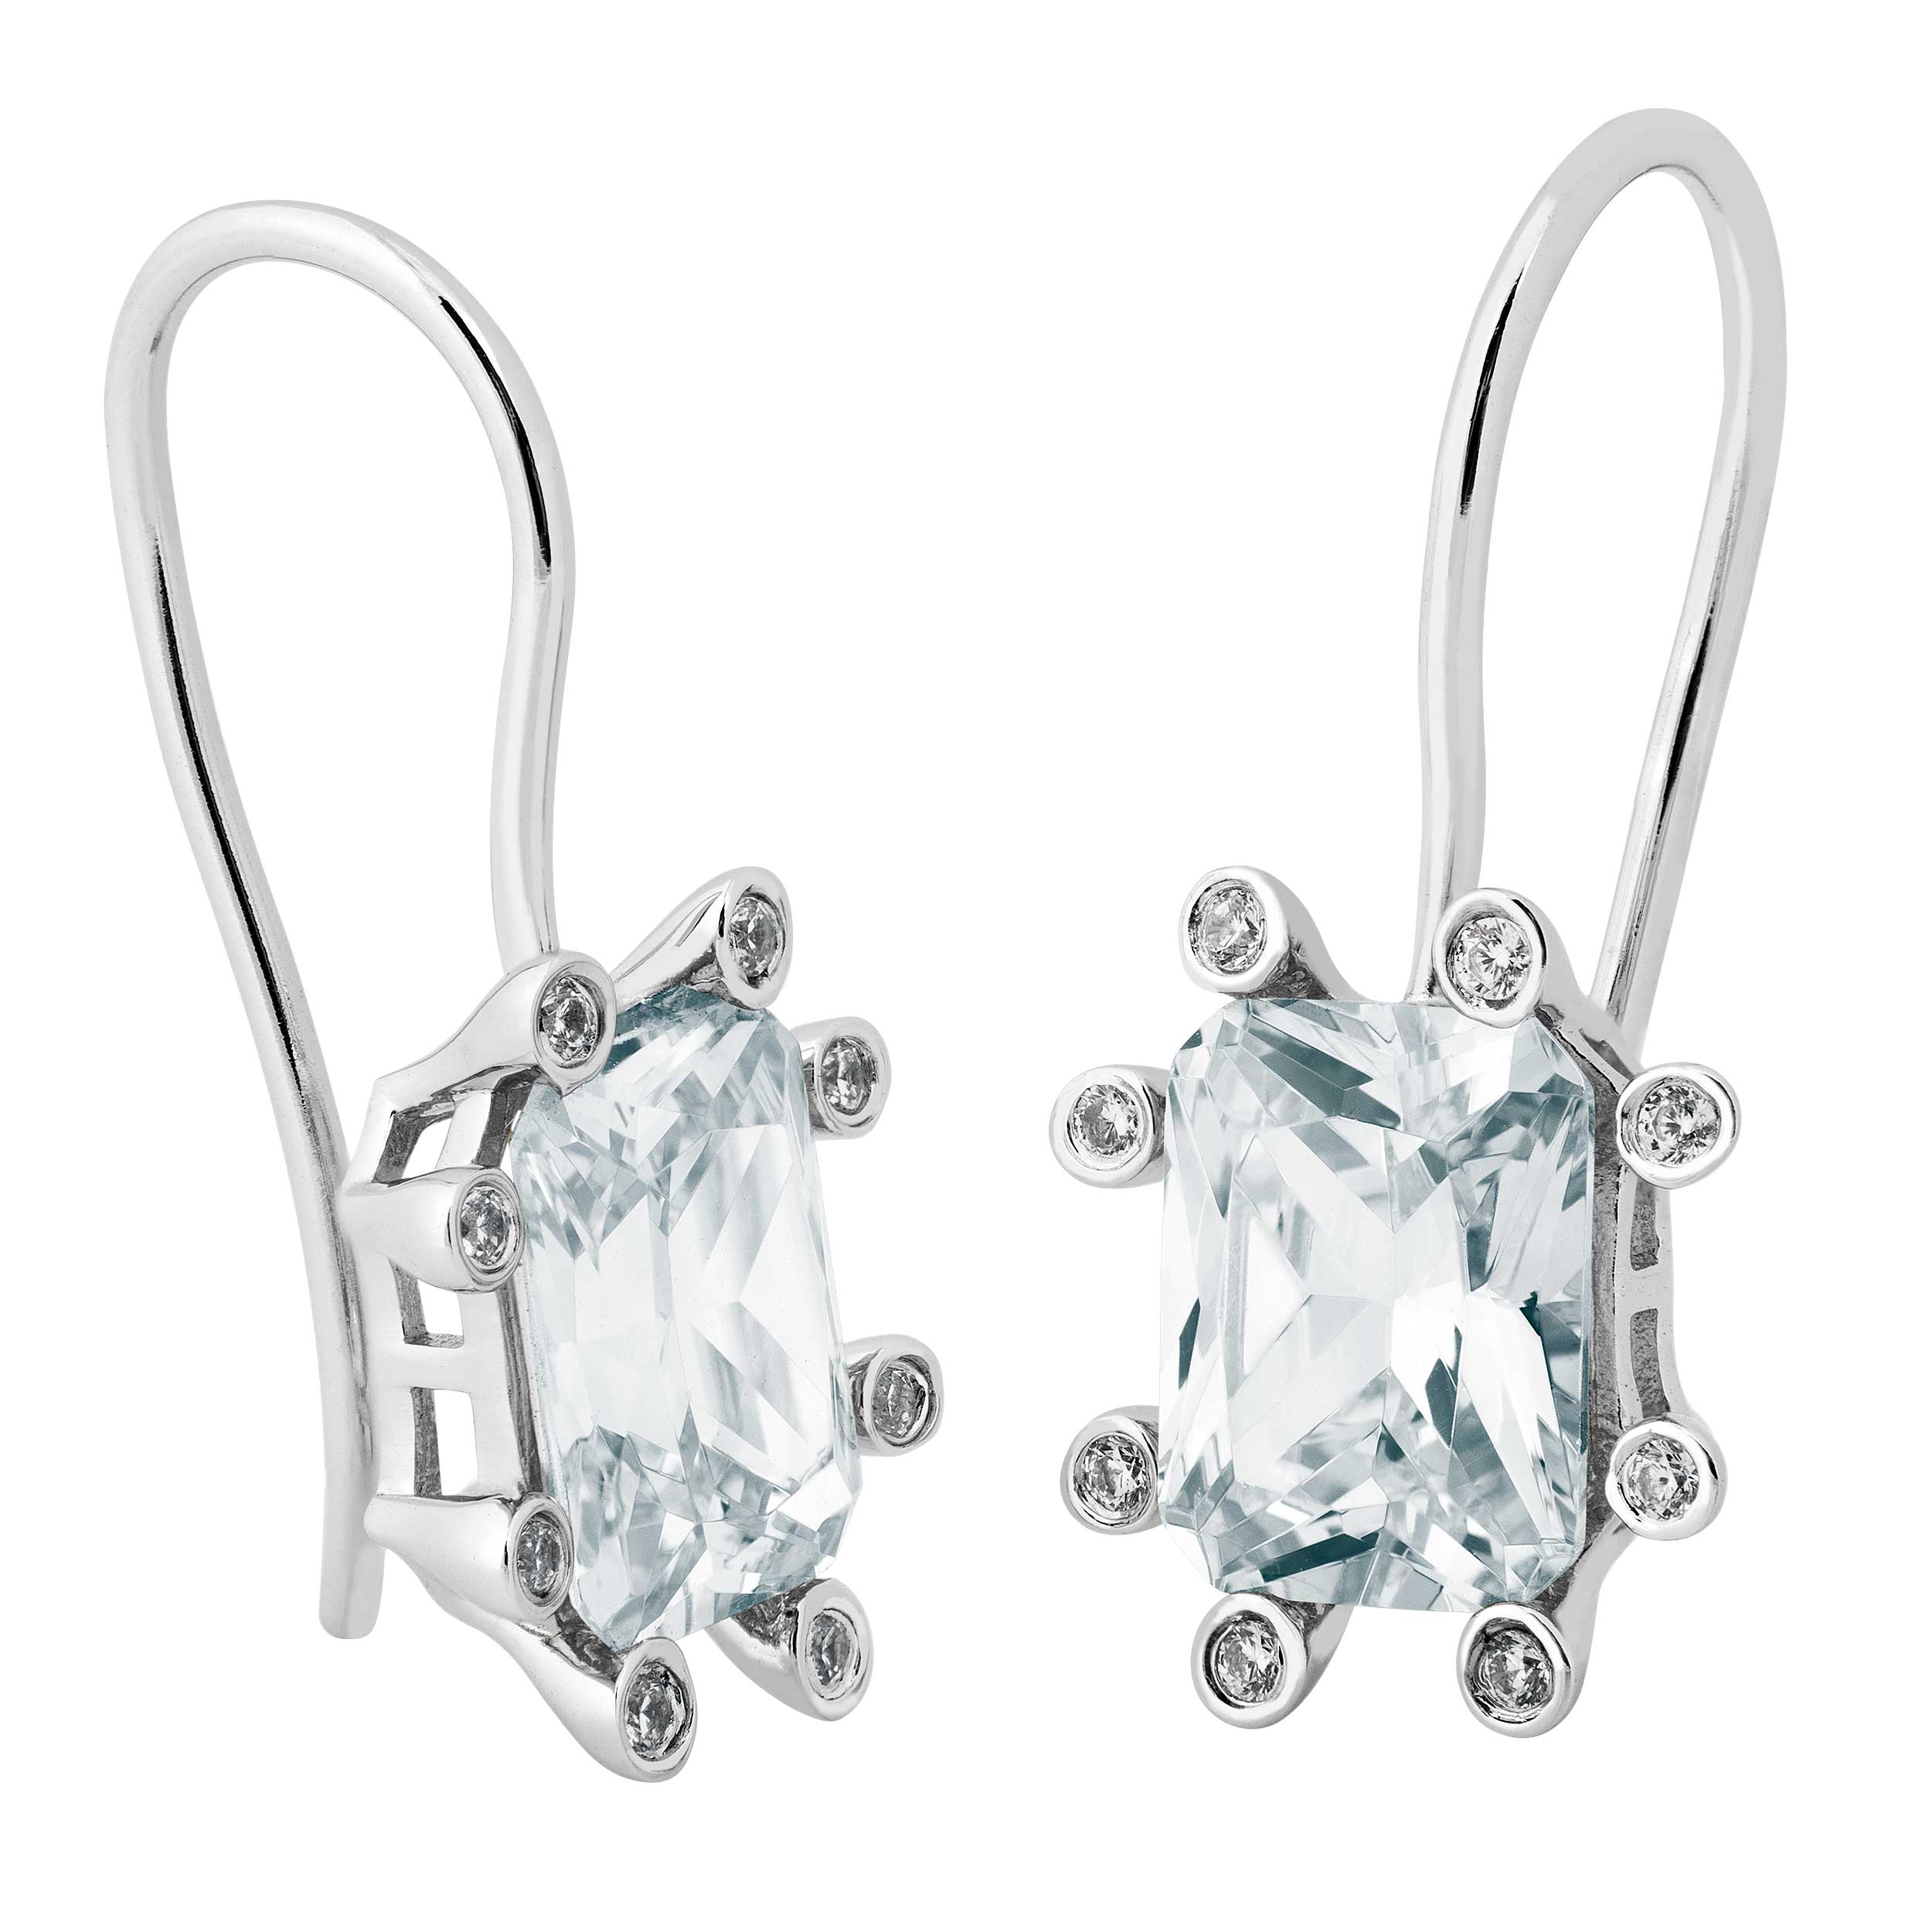 White Topaz Earrings, Rhodium Plated Sterling Silver